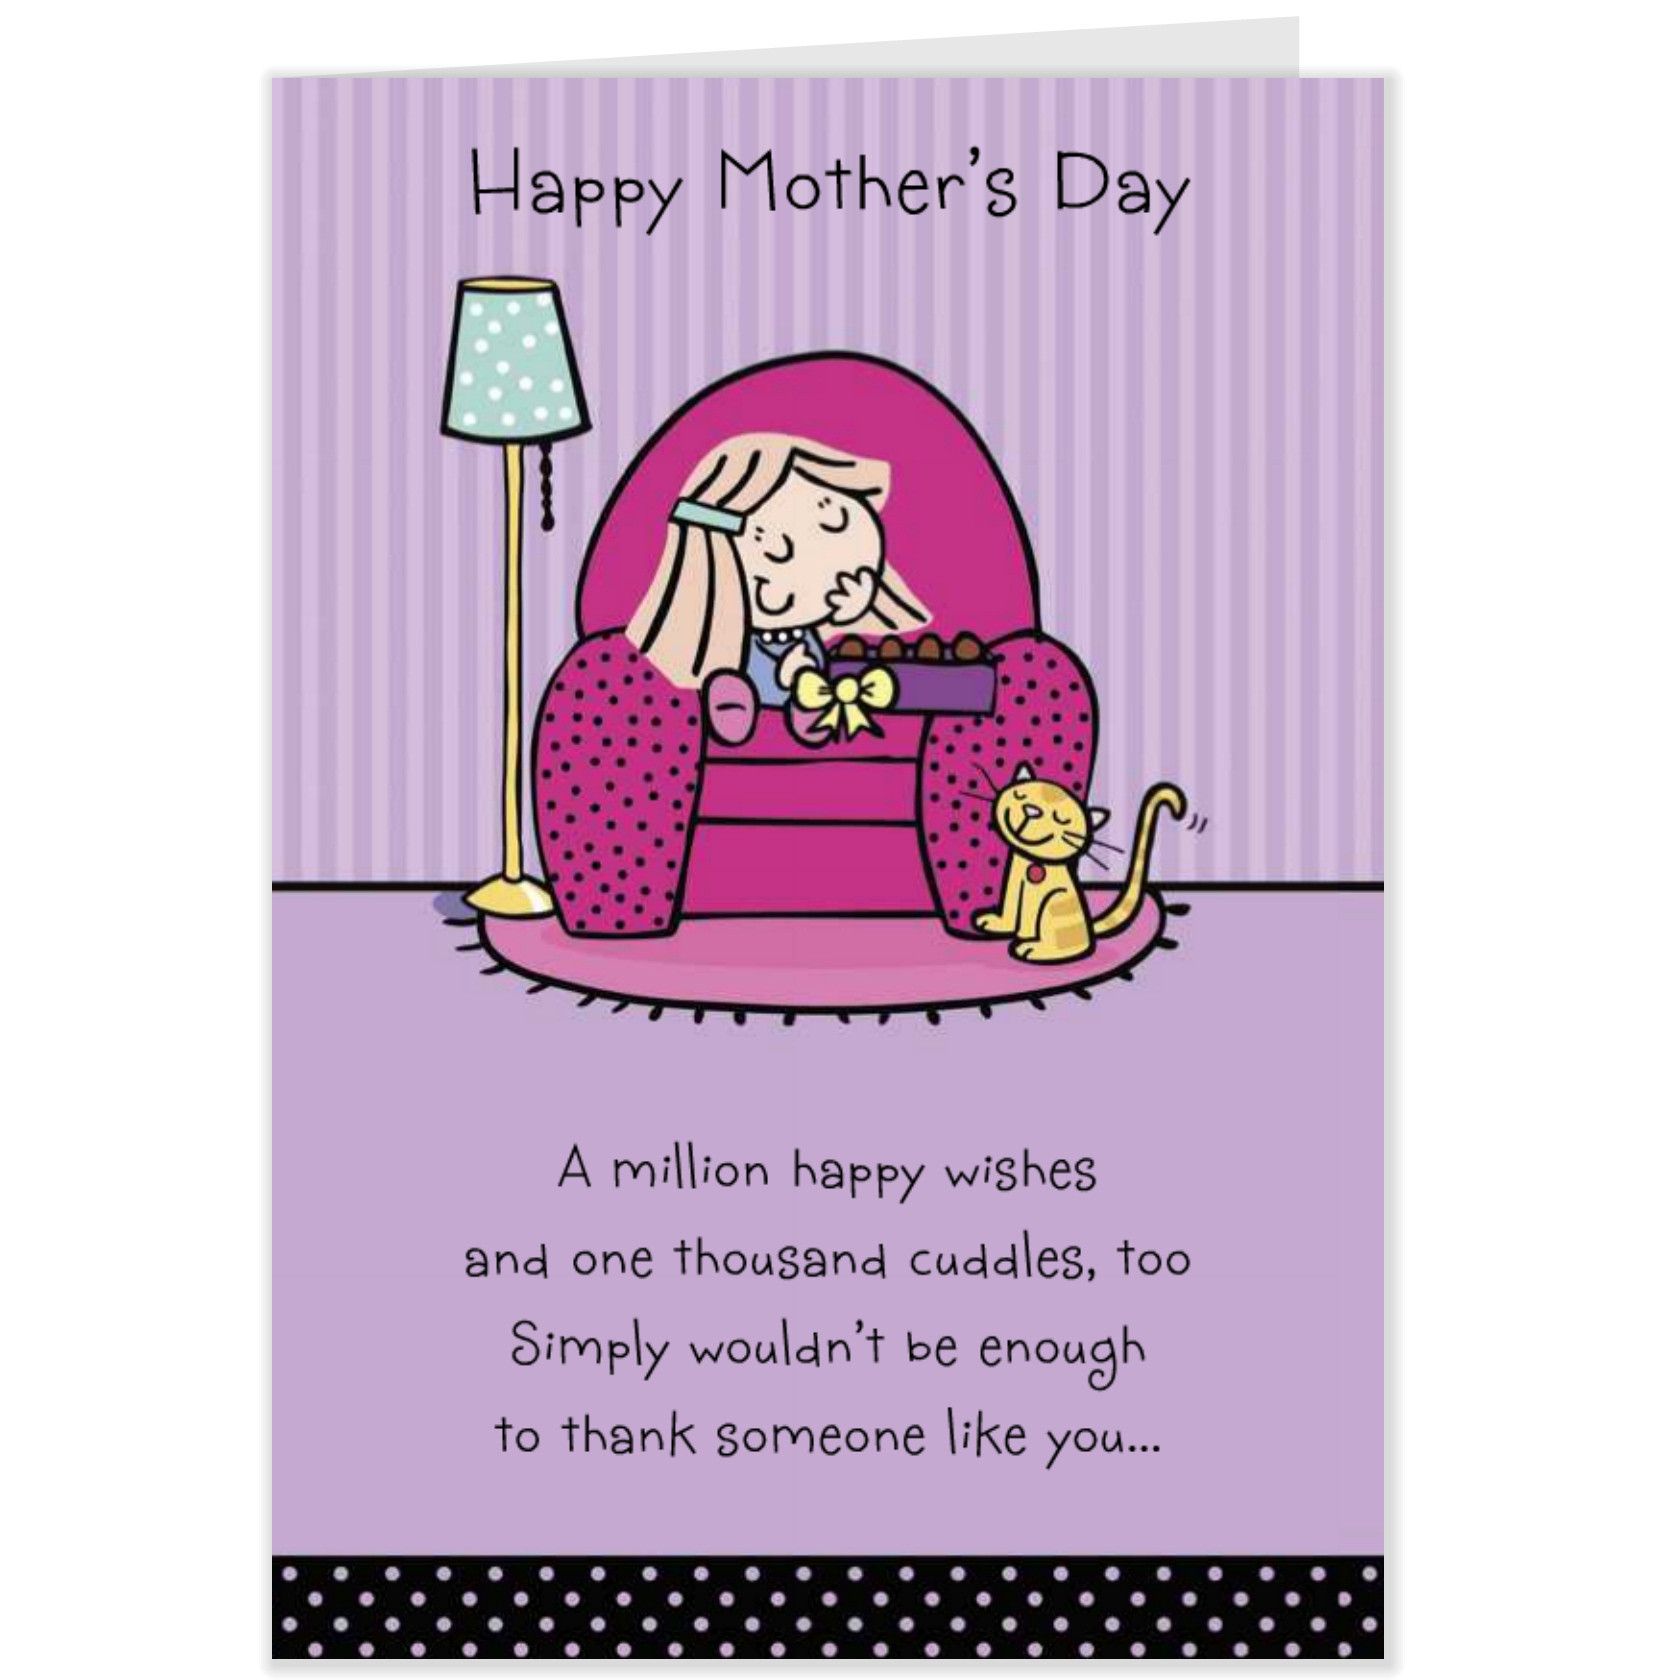 Funny Quotes For Mothers Day
 Meaningful Mothers Day Quotes QuotesGram